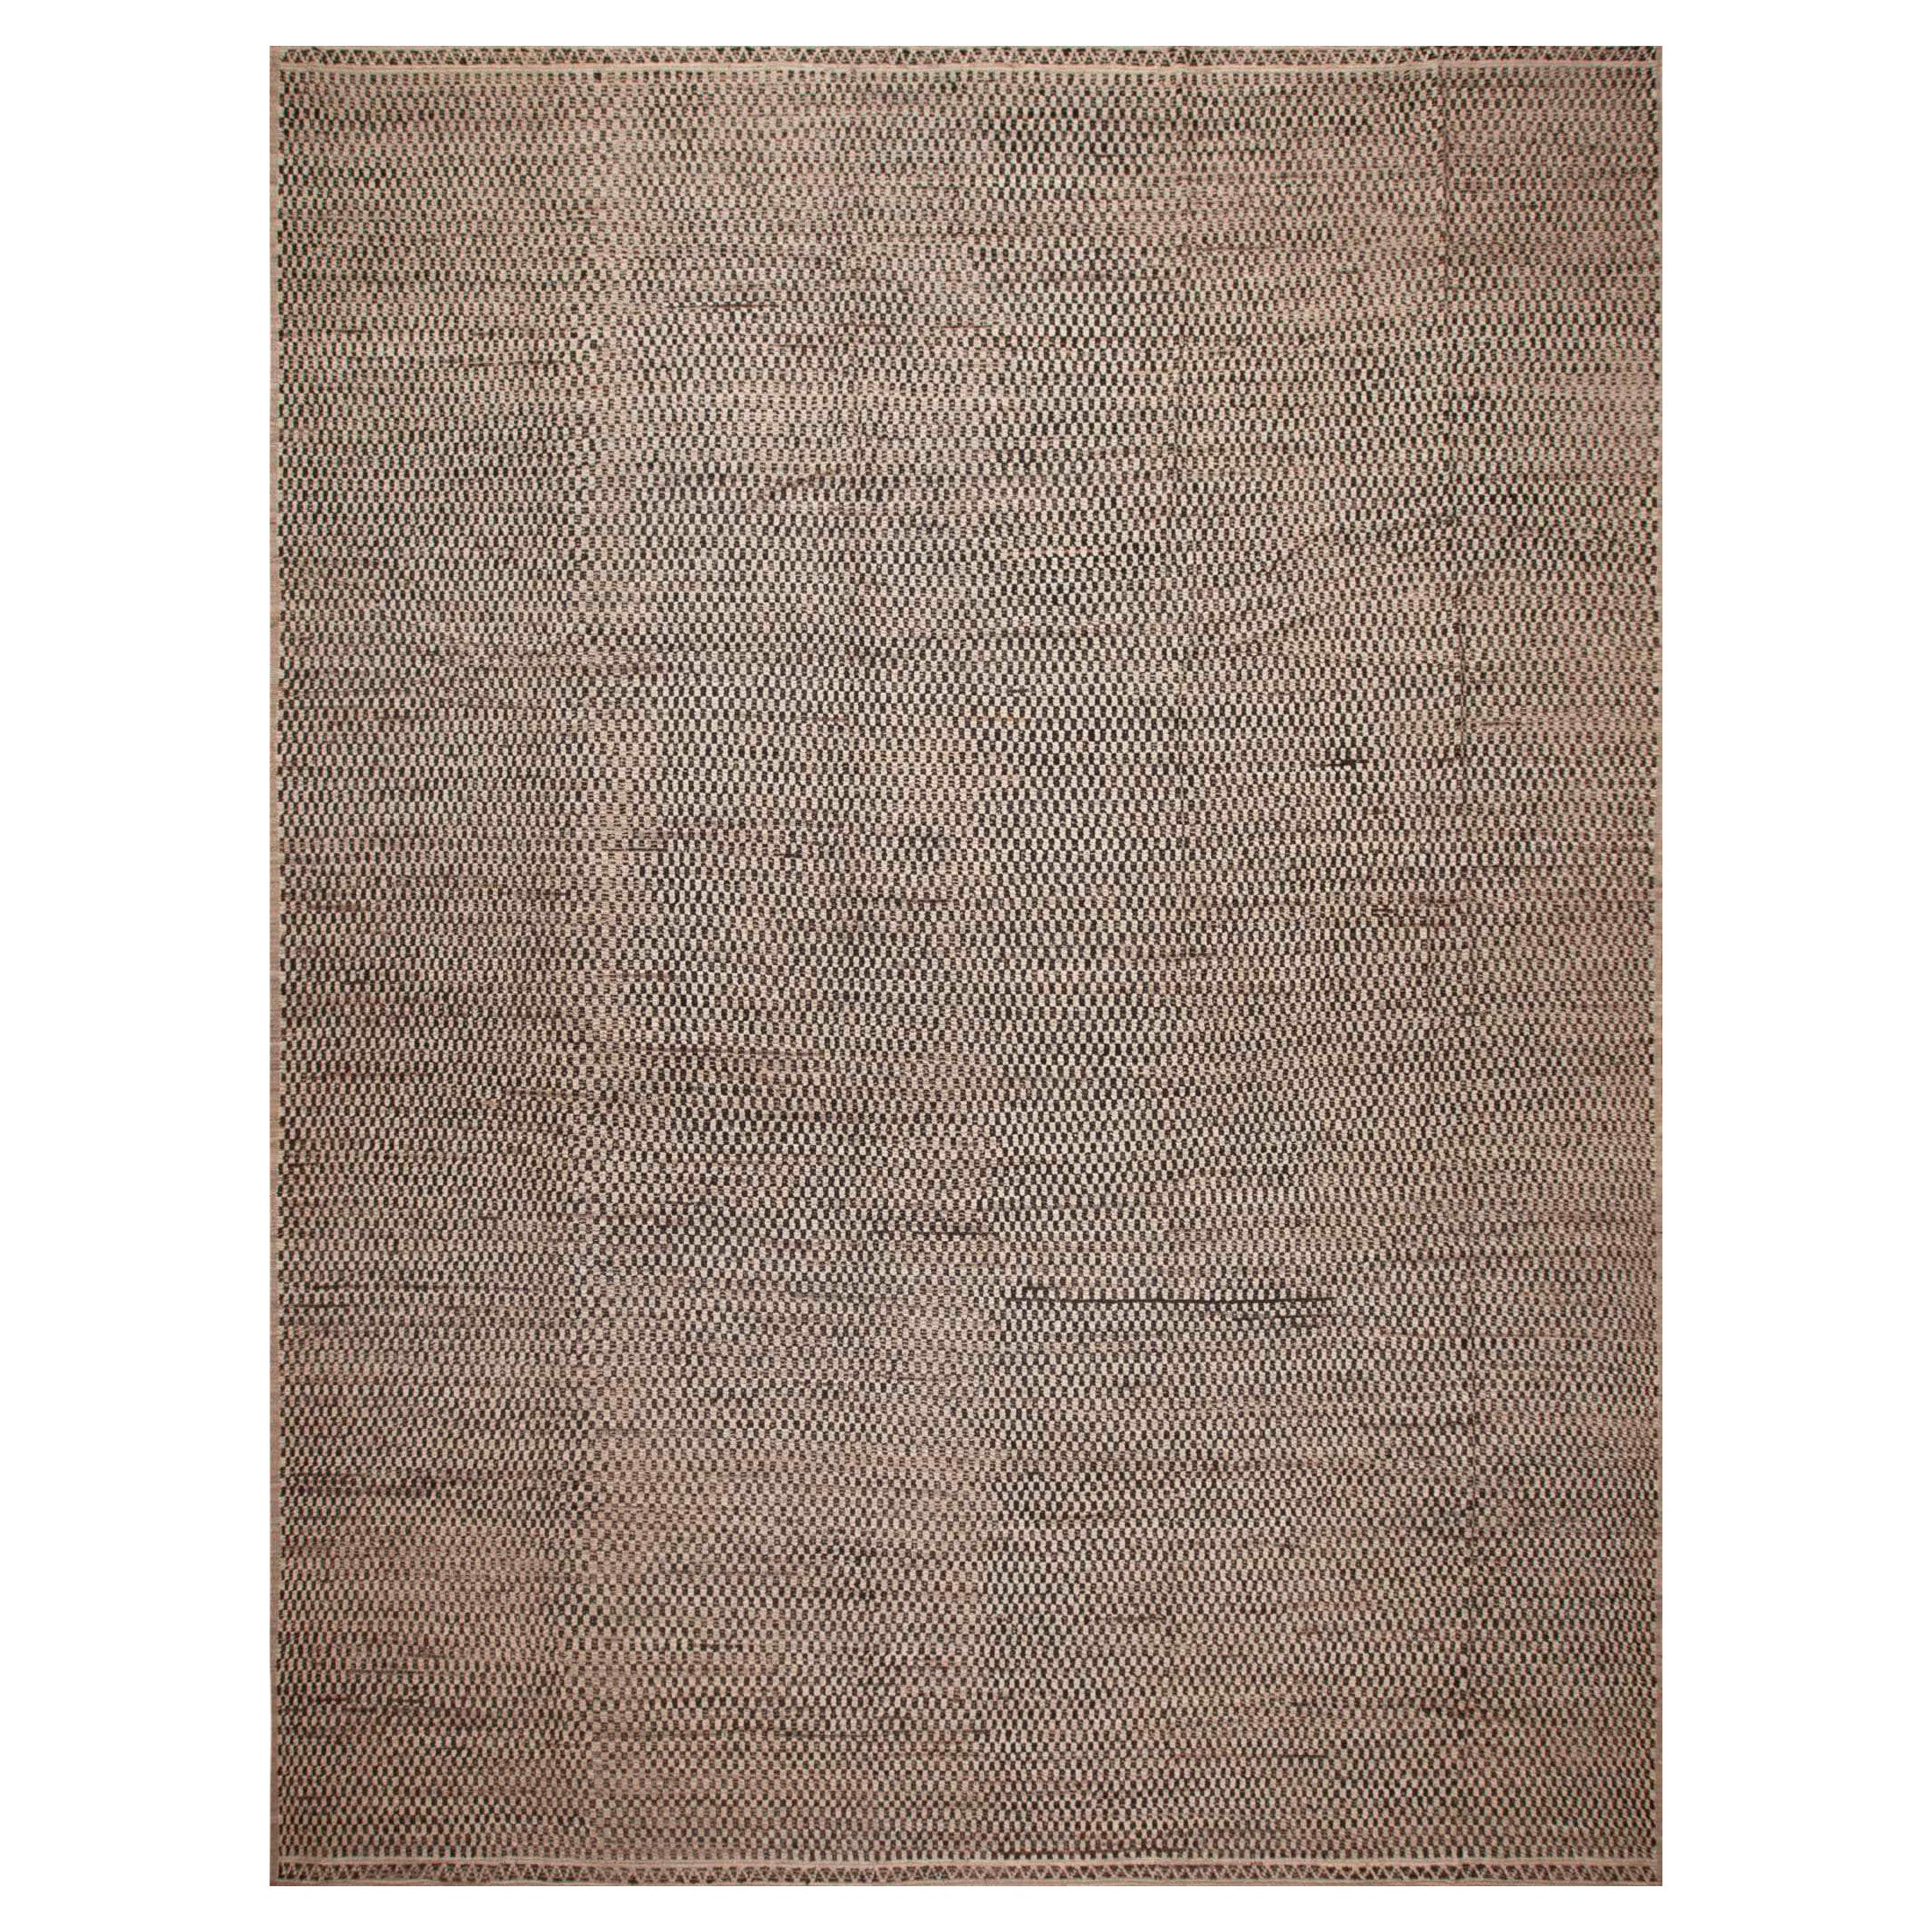 Nazmiyal Collection Checkerboard Patterned Contemporary Modern Rug 14'2" x 18'9"